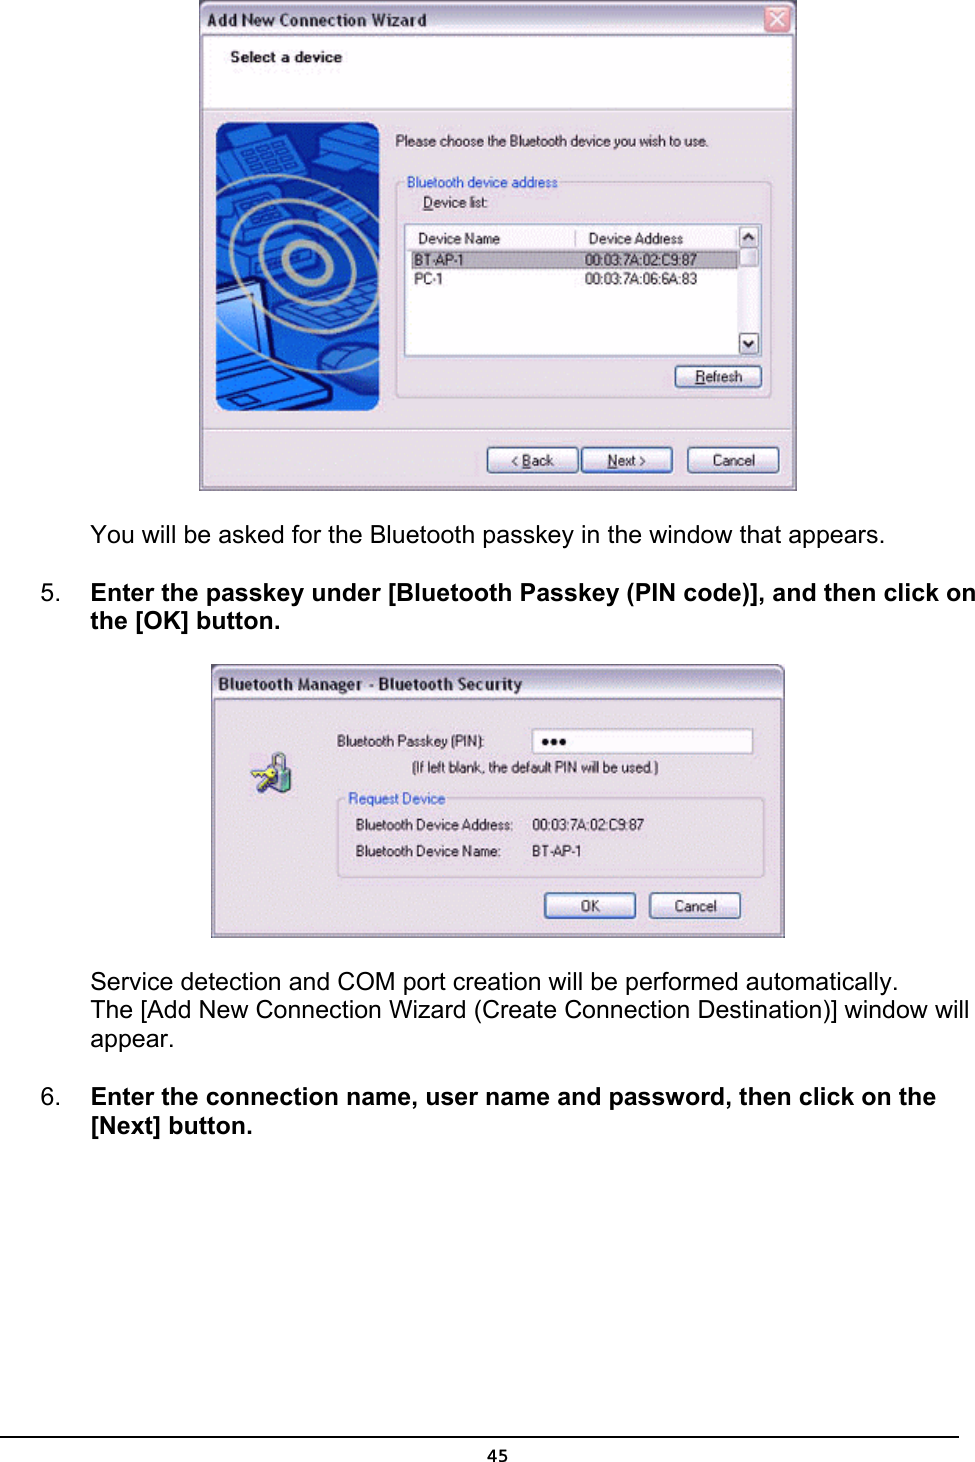   You will be asked for the Bluetooth passkey in the window that appears. 5.  Enter the passkey under [Bluetooth Passkey (PIN code)], and then click on the [OK] button.  Service detection and COM port creation will be performed automatically. The [Add New Connection Wizard (Create Connection Destination)] window will appear. 6.  Enter the connection name, user name and password, then click on the        [Next] button.  45